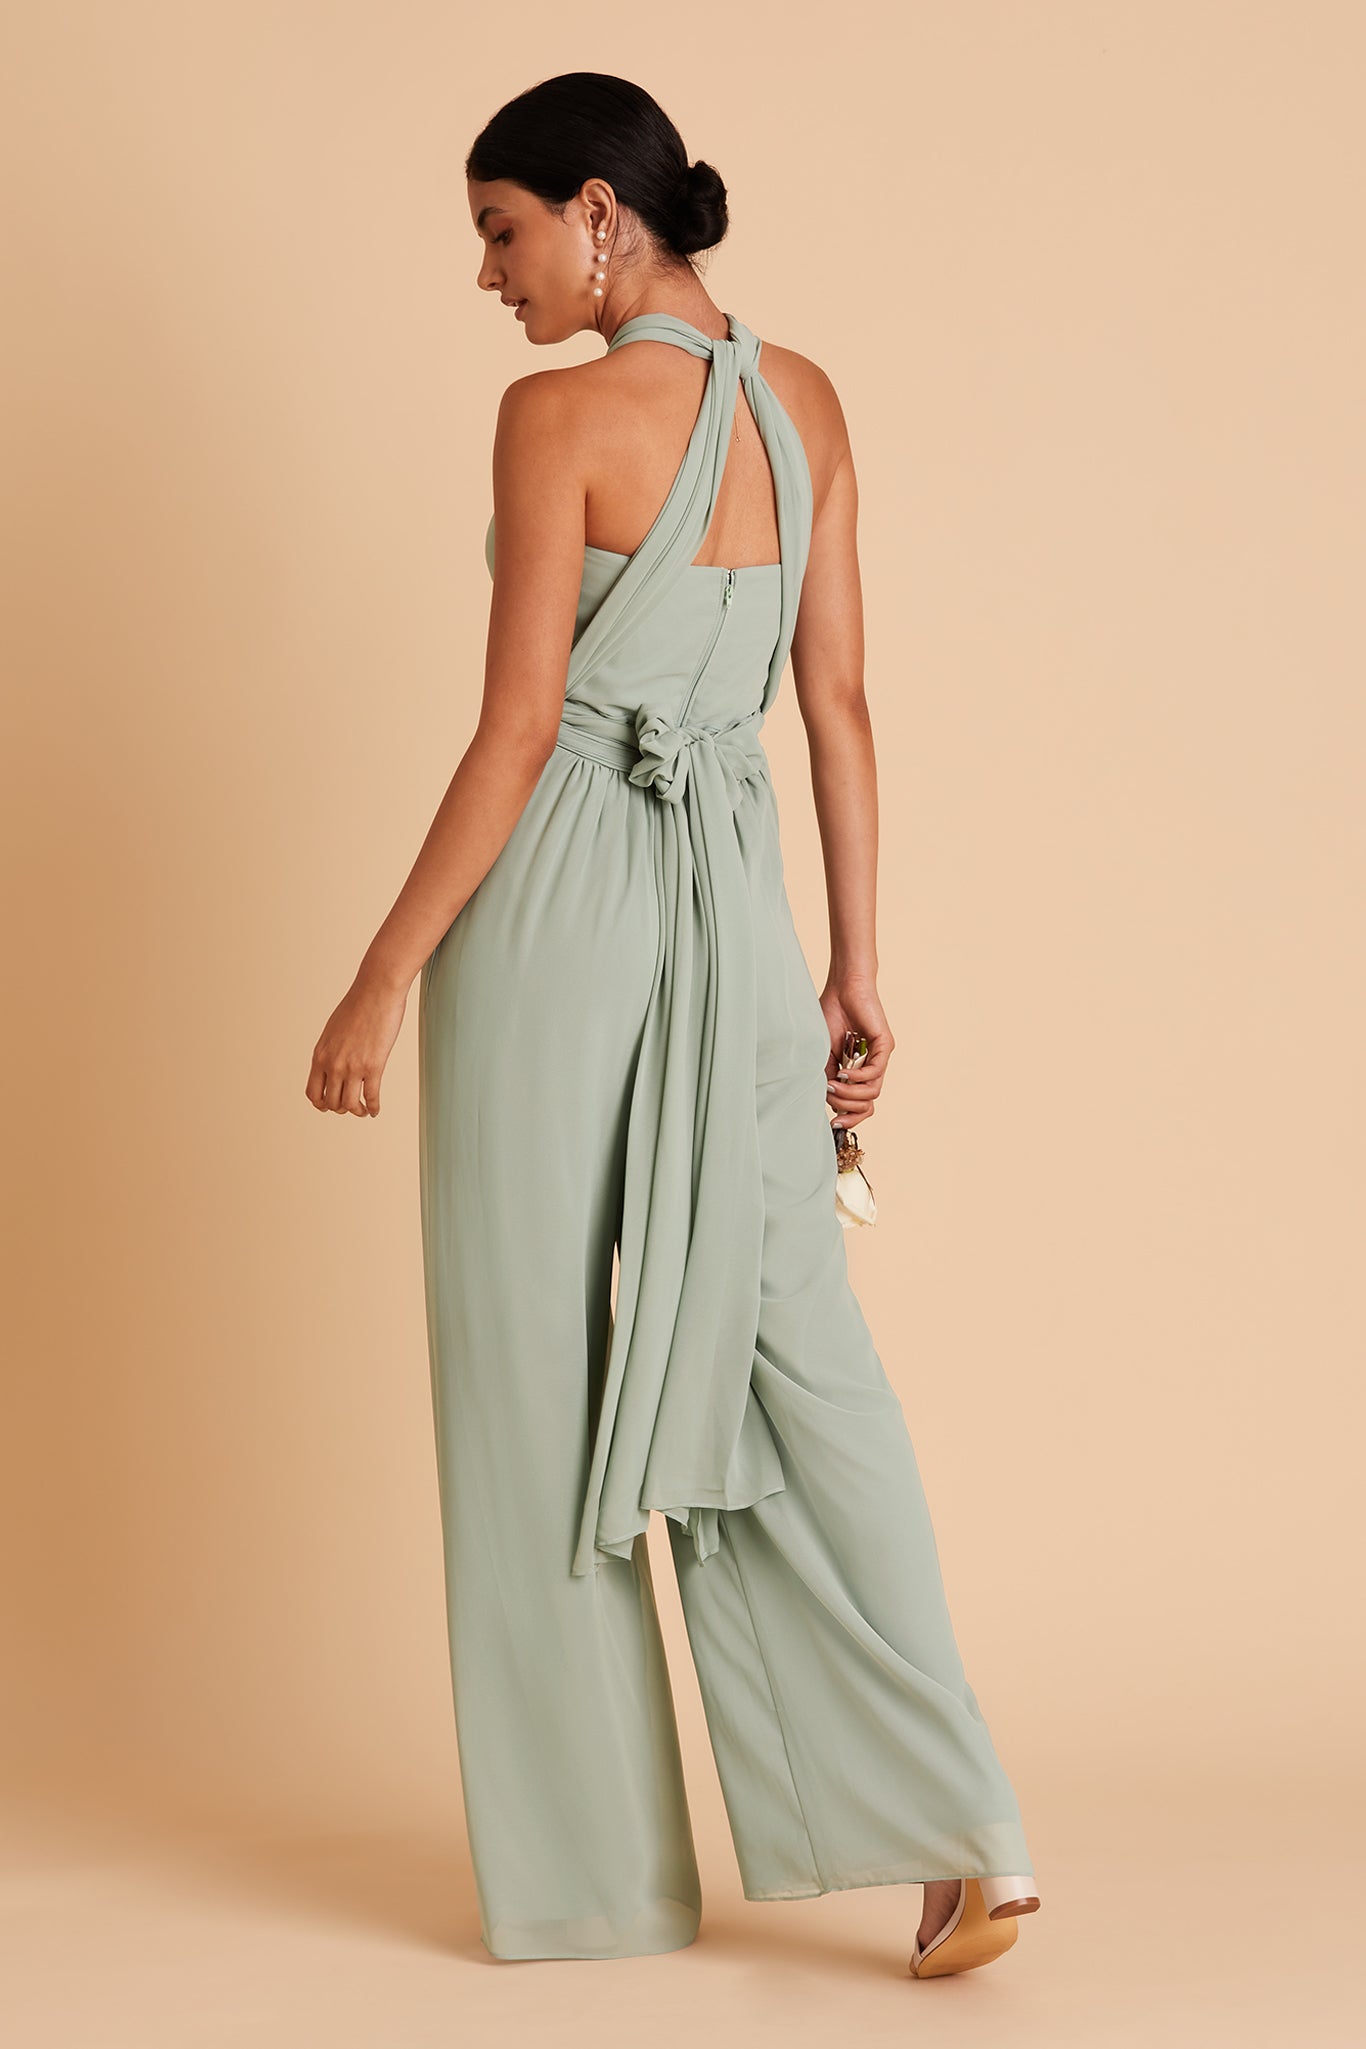 Gigi convertible jumpsuit in sage chiffon by Birdy Grey, back view